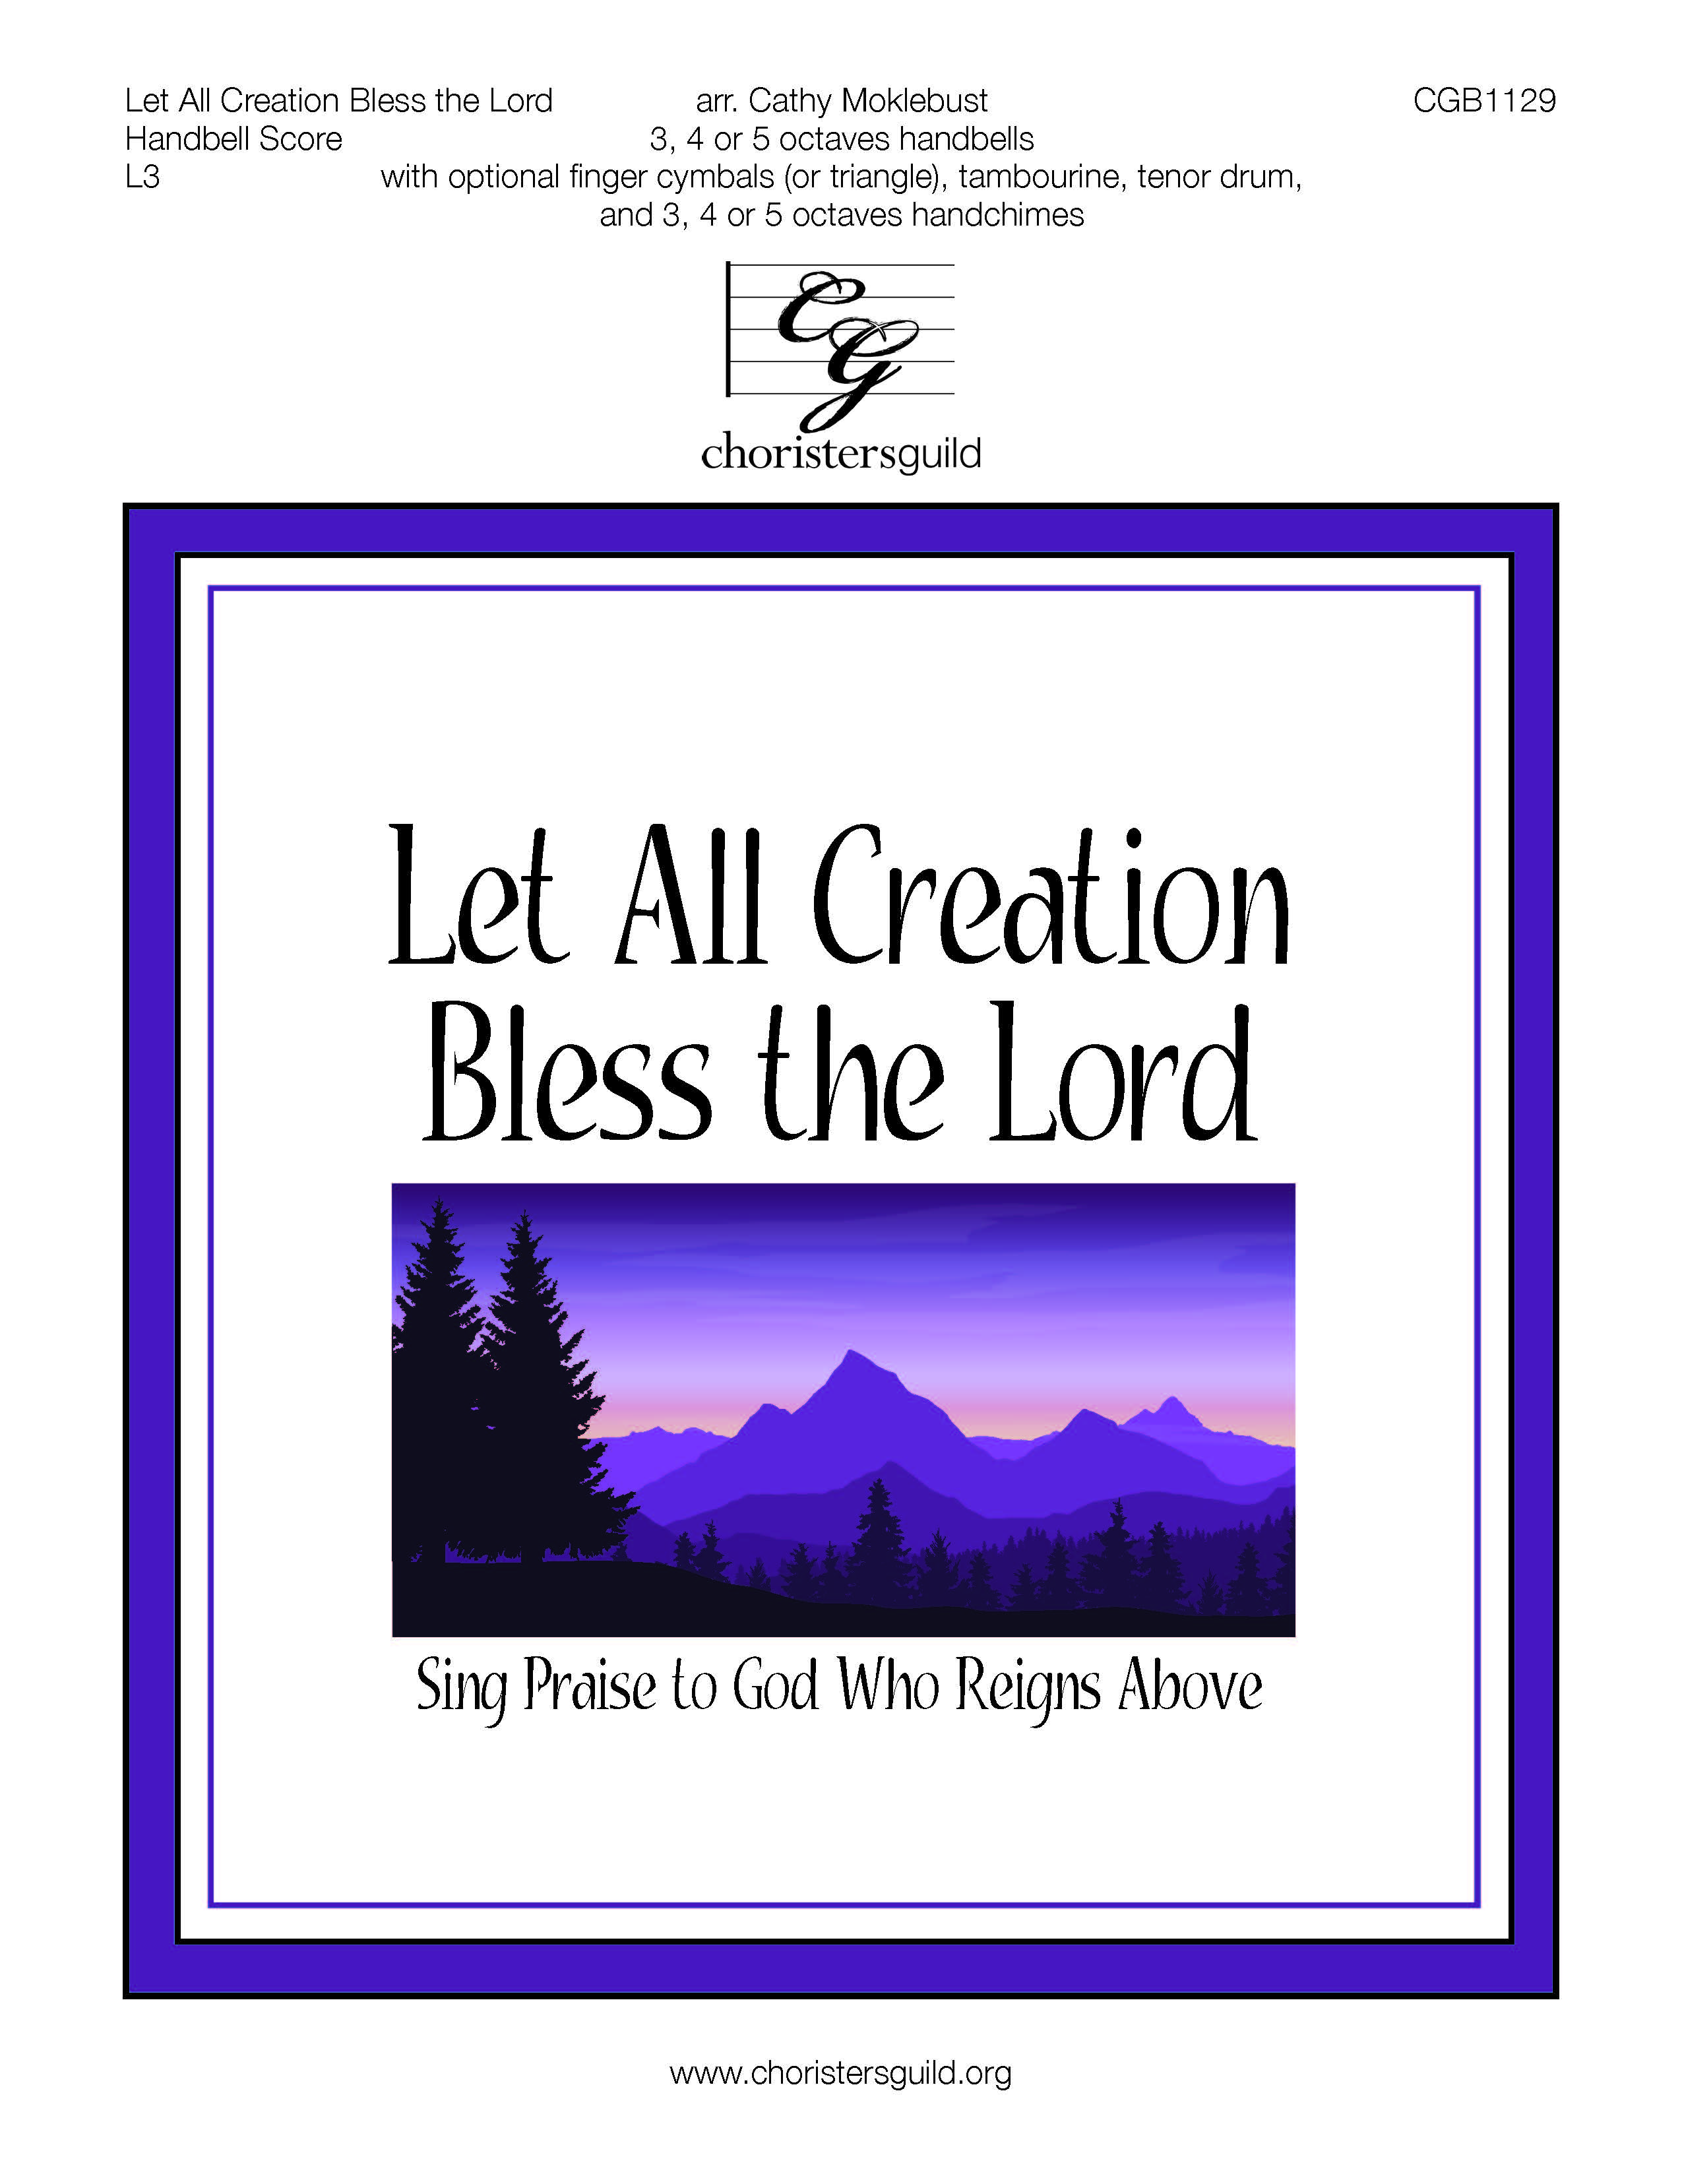 Let All Creation Bless the Lord - 3-5 octaves handbell score